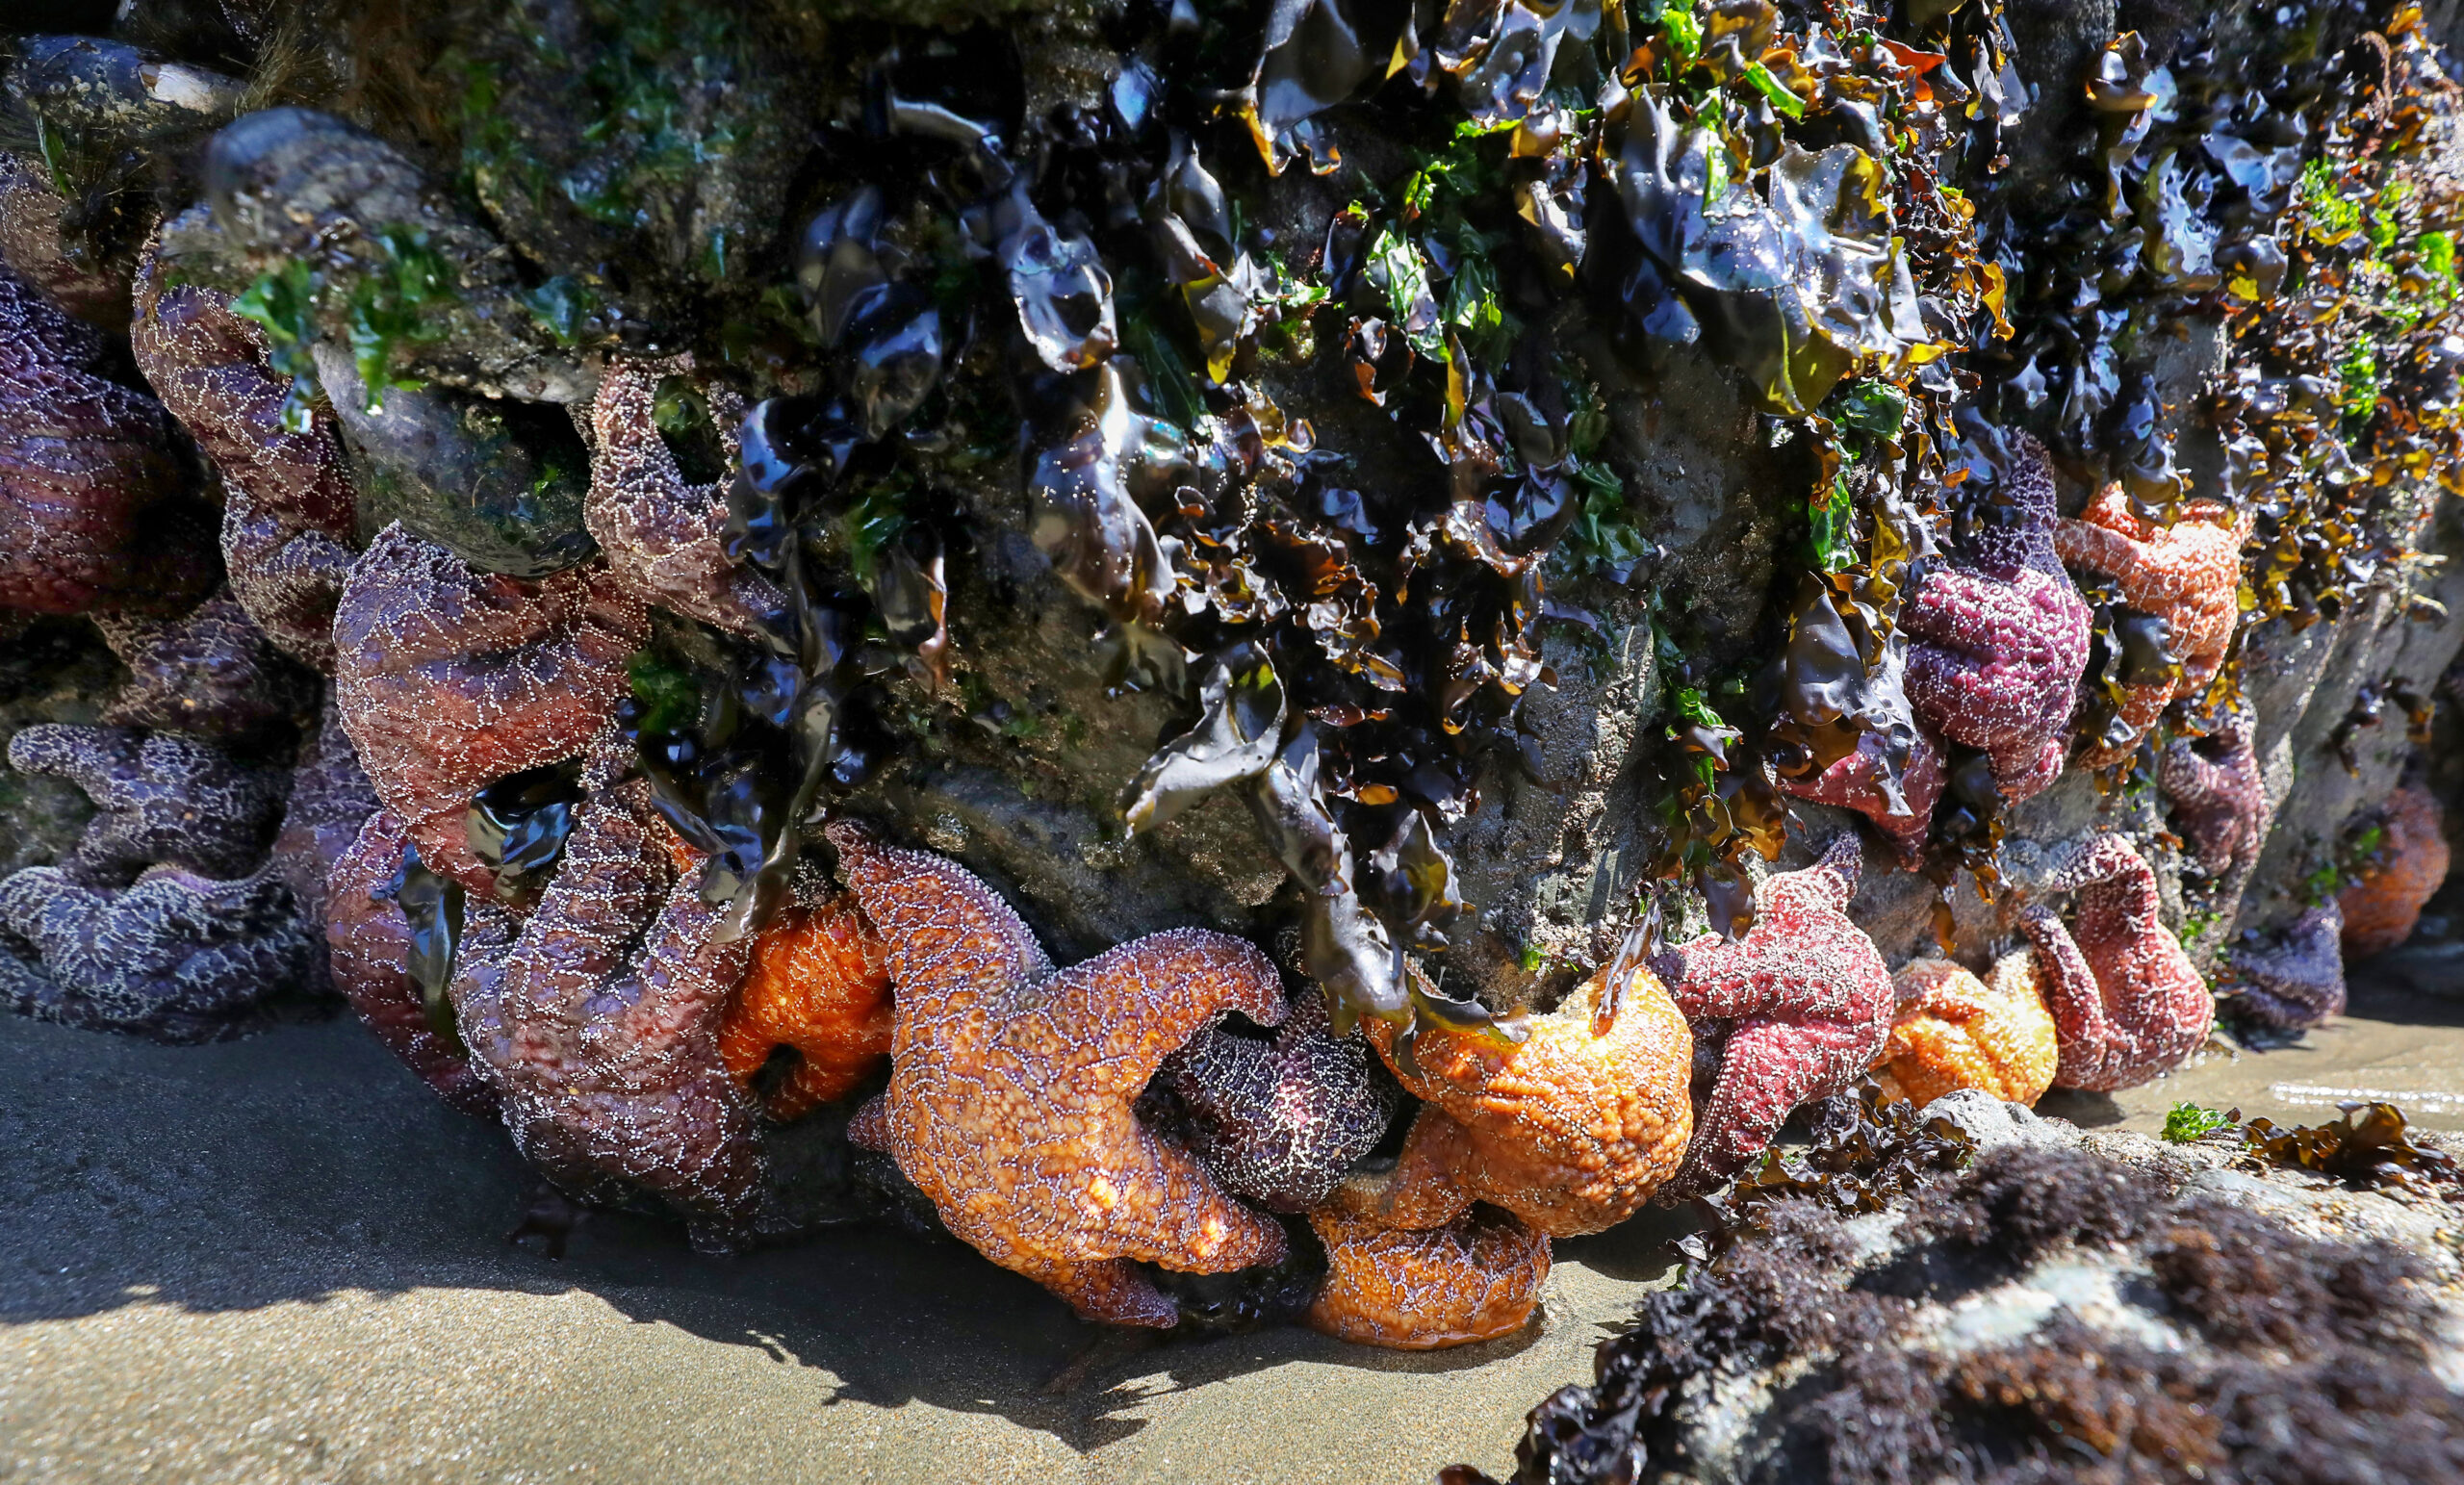 Stands of mussels and sea stars signal a small recovery along the coast after several years of challenging conditions. (Christopher Chung/The Press Democrat)